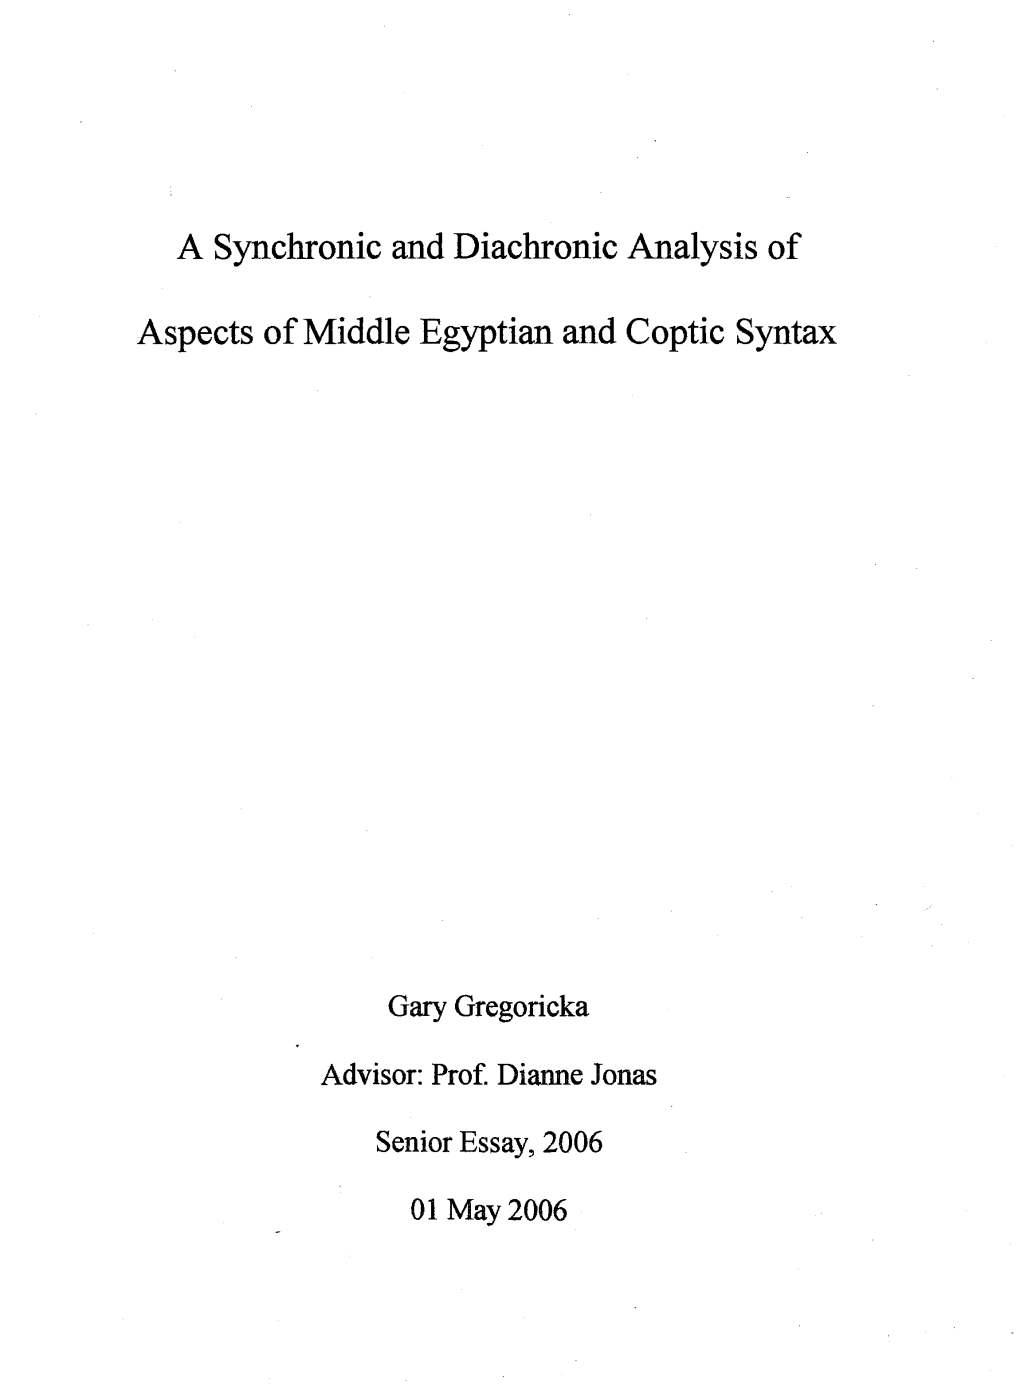 A Synchronic and Diachronic Analysis of Aspects Ofmiddle Egyptian and Coptic Syntax